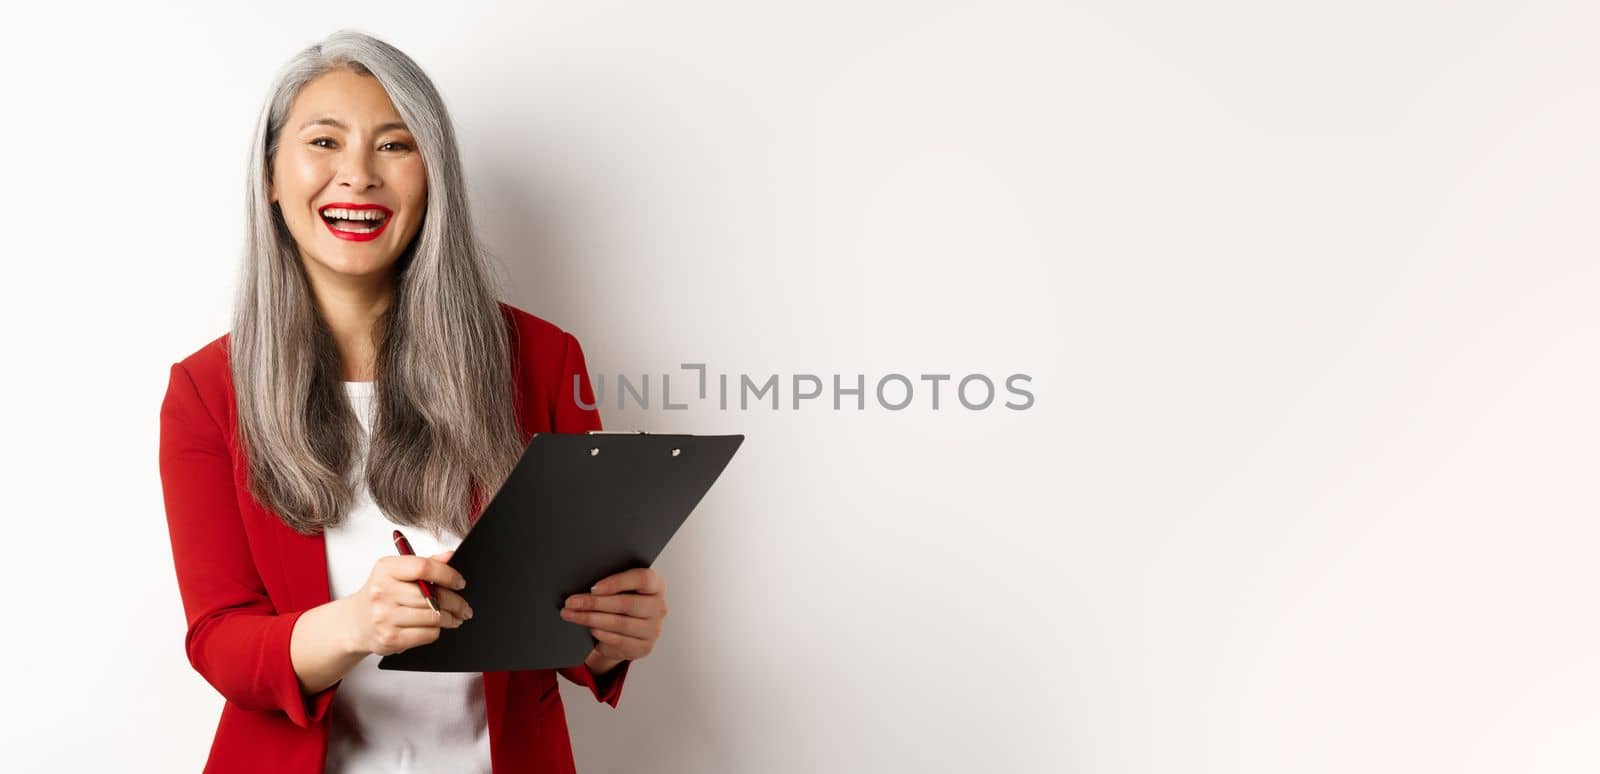 Happy asian office employee, woman in red blazer, working and laughing, holding clipboard with documents, standing over white background.